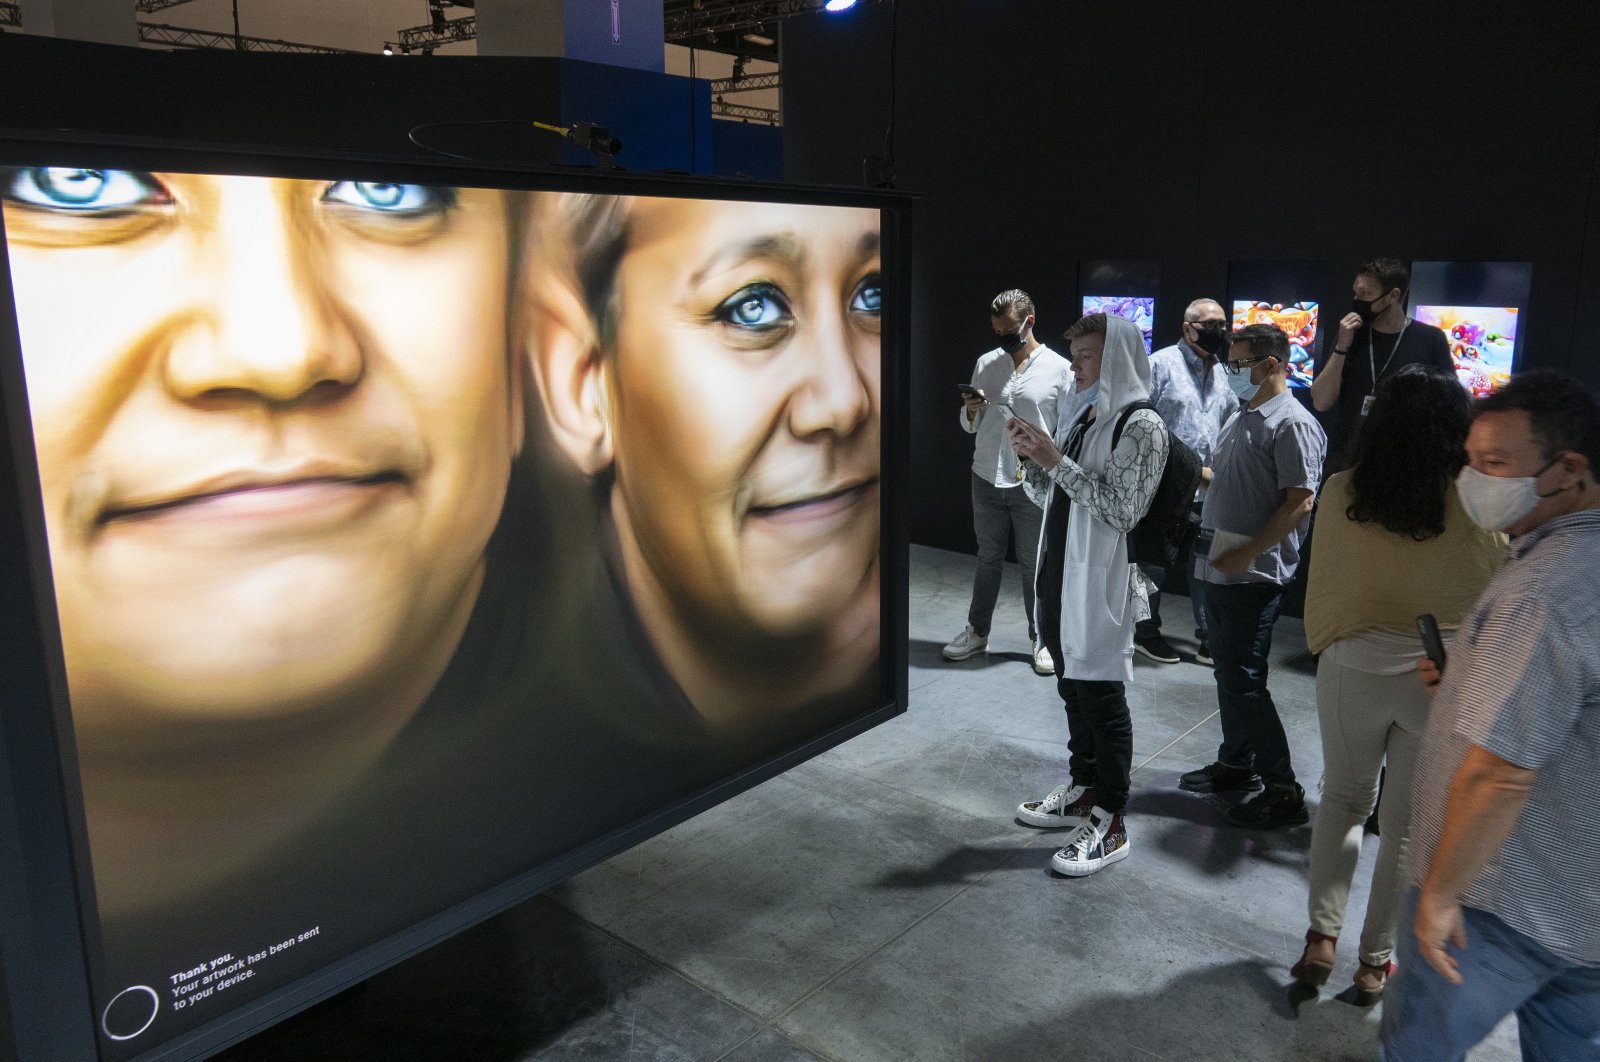 People take in the &quot;Human   Machine&quot; NFTS art exhibition, during the general public opening day of the Art Basel Miami Beach fair at the Miami Beach Convention Center in Miami, Florida, U.S., Dec. 2, 2021. (EPA Photo)